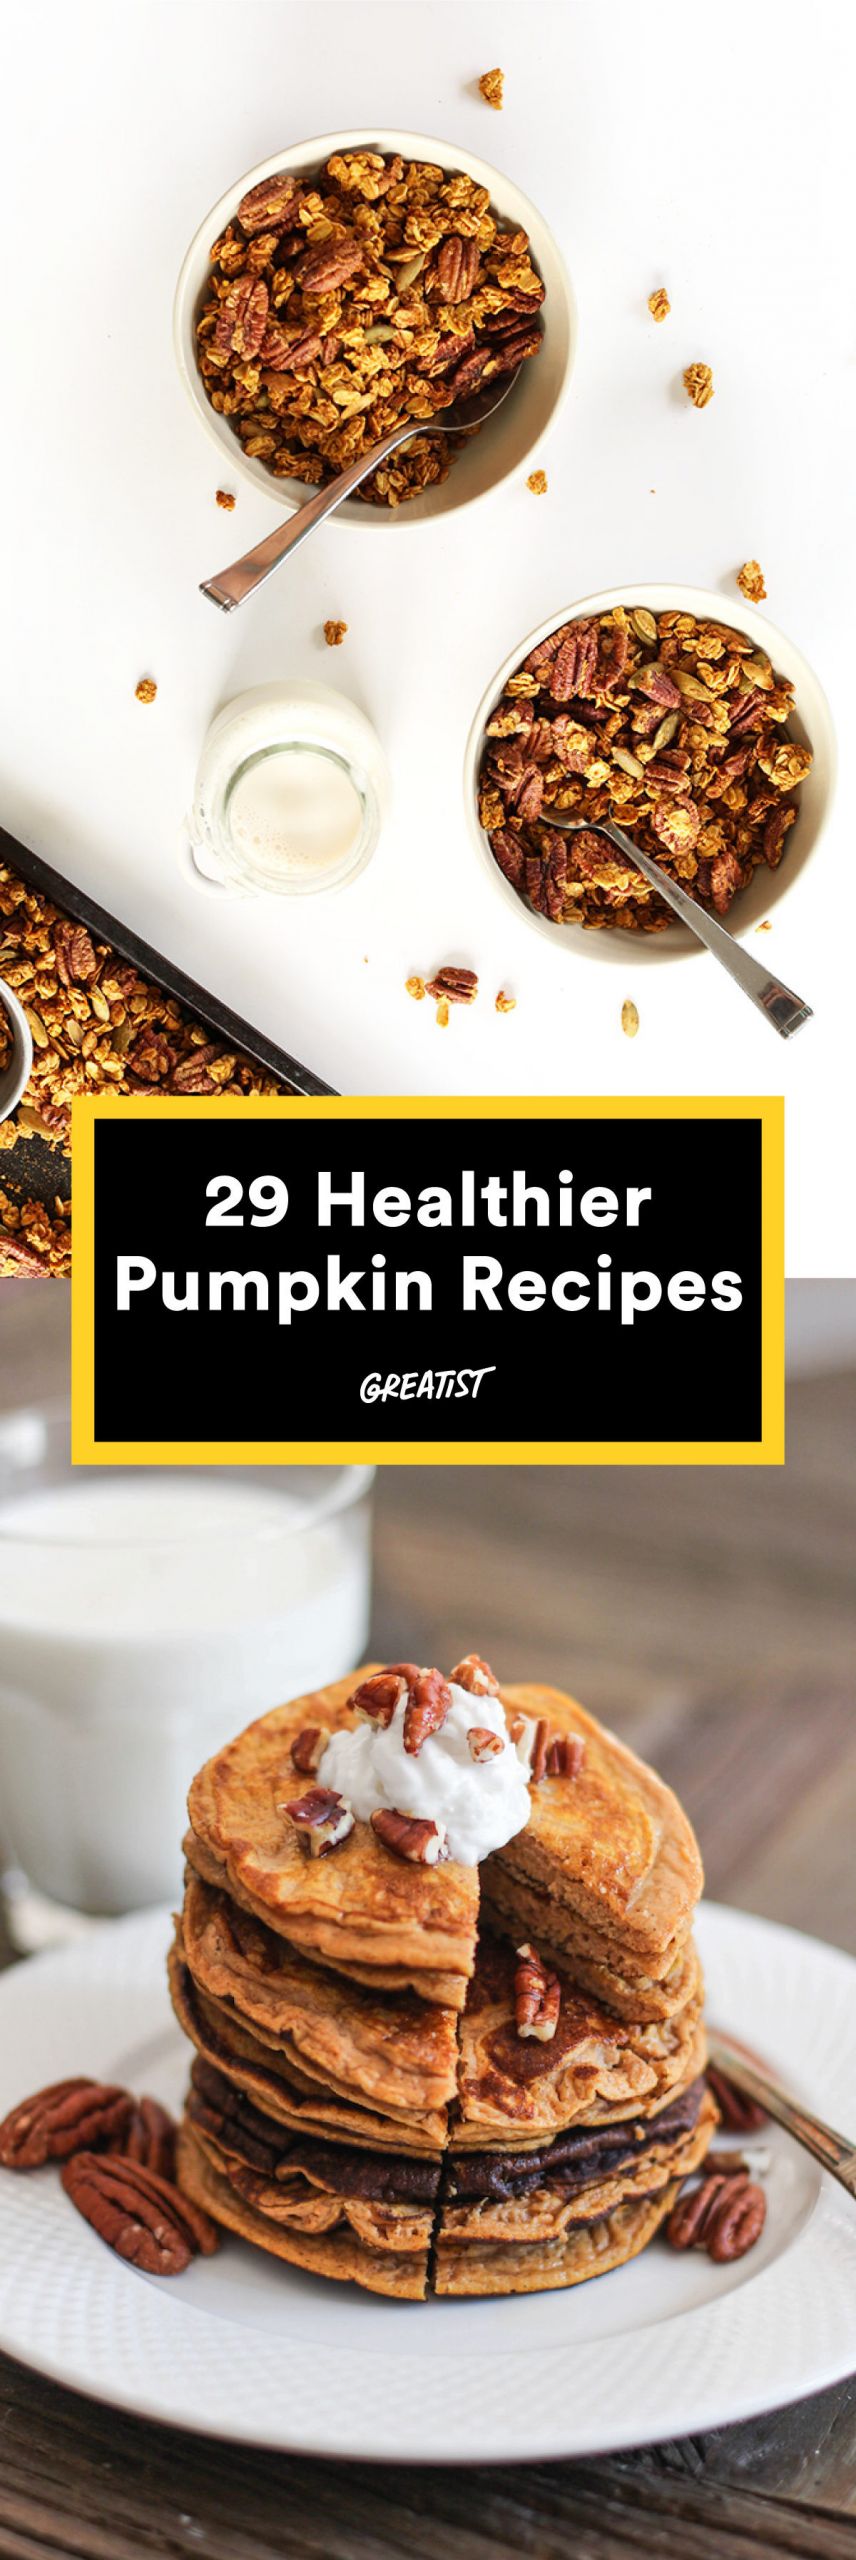 Healthy Canned Pumpkin Recipes
 29 Unexpected but Awesome Ways to Use Canned Pumpkin